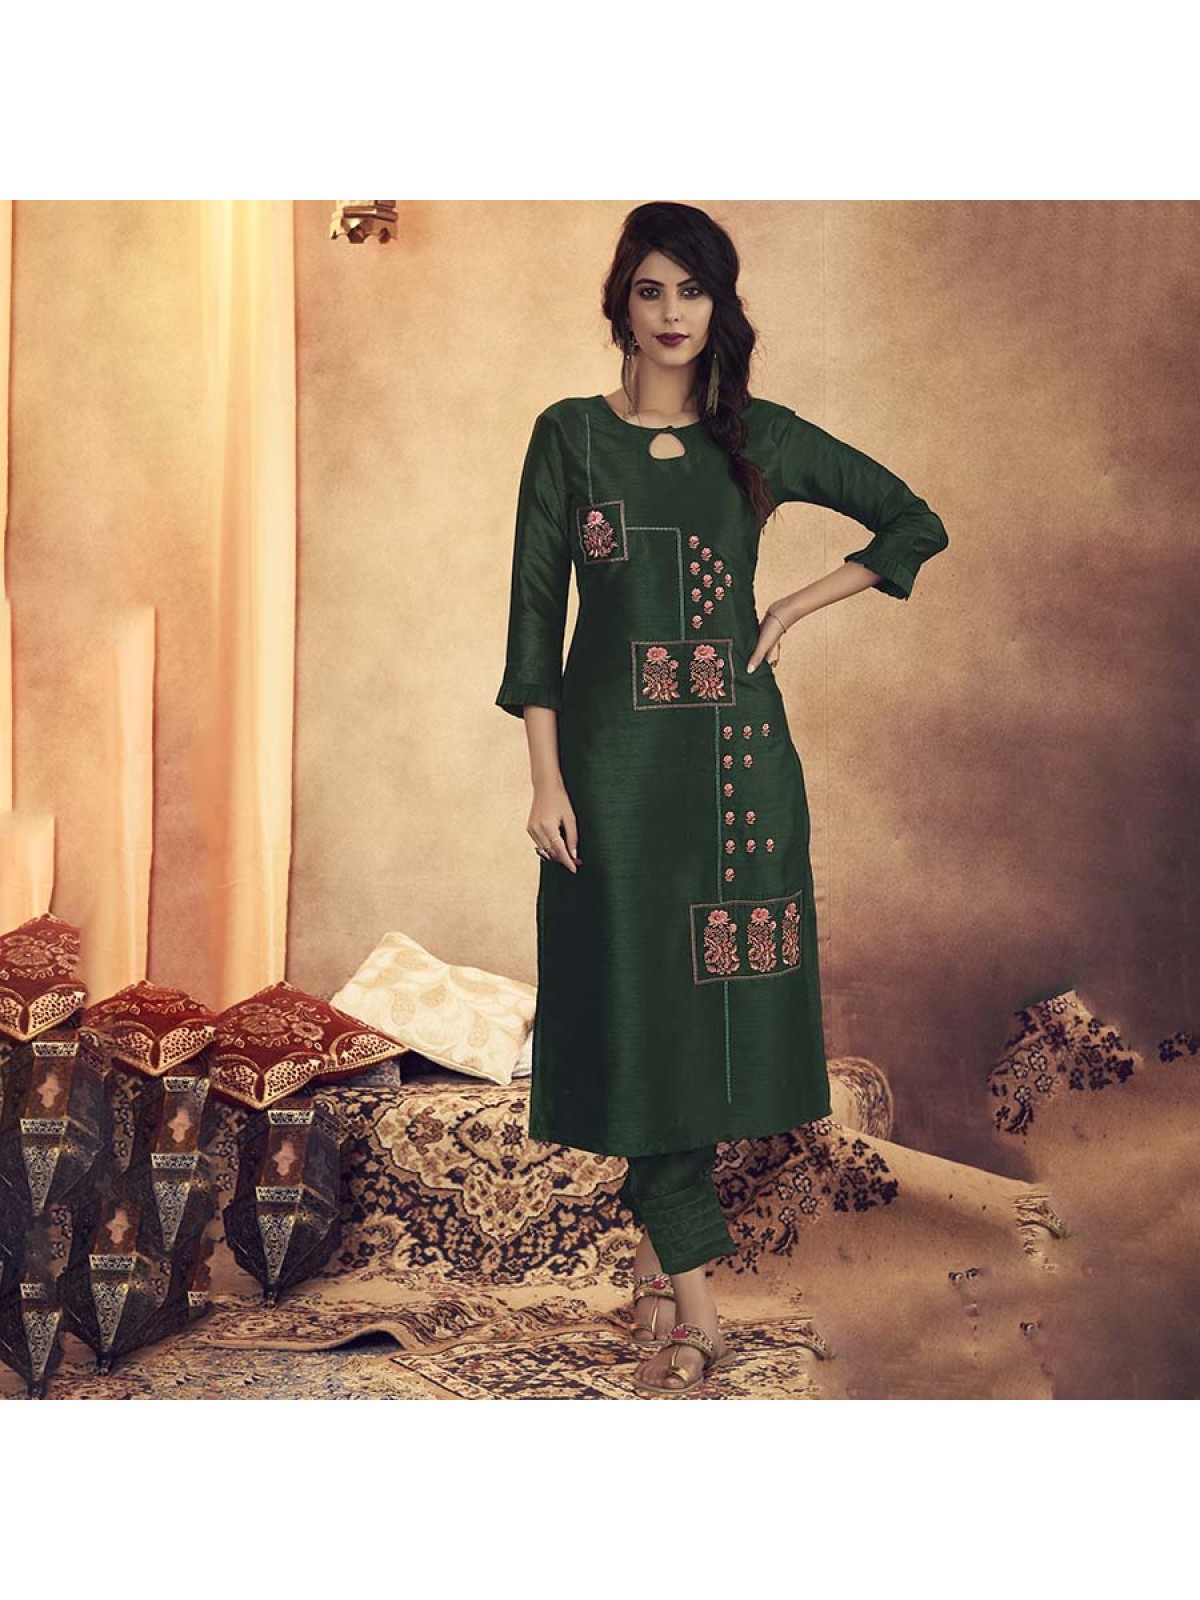 STYLEMAX VINTAGE VOL 4 COTTON WITH HEAVY EMBROIDERY READYMADE ETHNIC  COLLECTION KURTI WITH PLAZZO  Salwar Kameez Wholesaler  Kurtis Wholesaler   Sarees